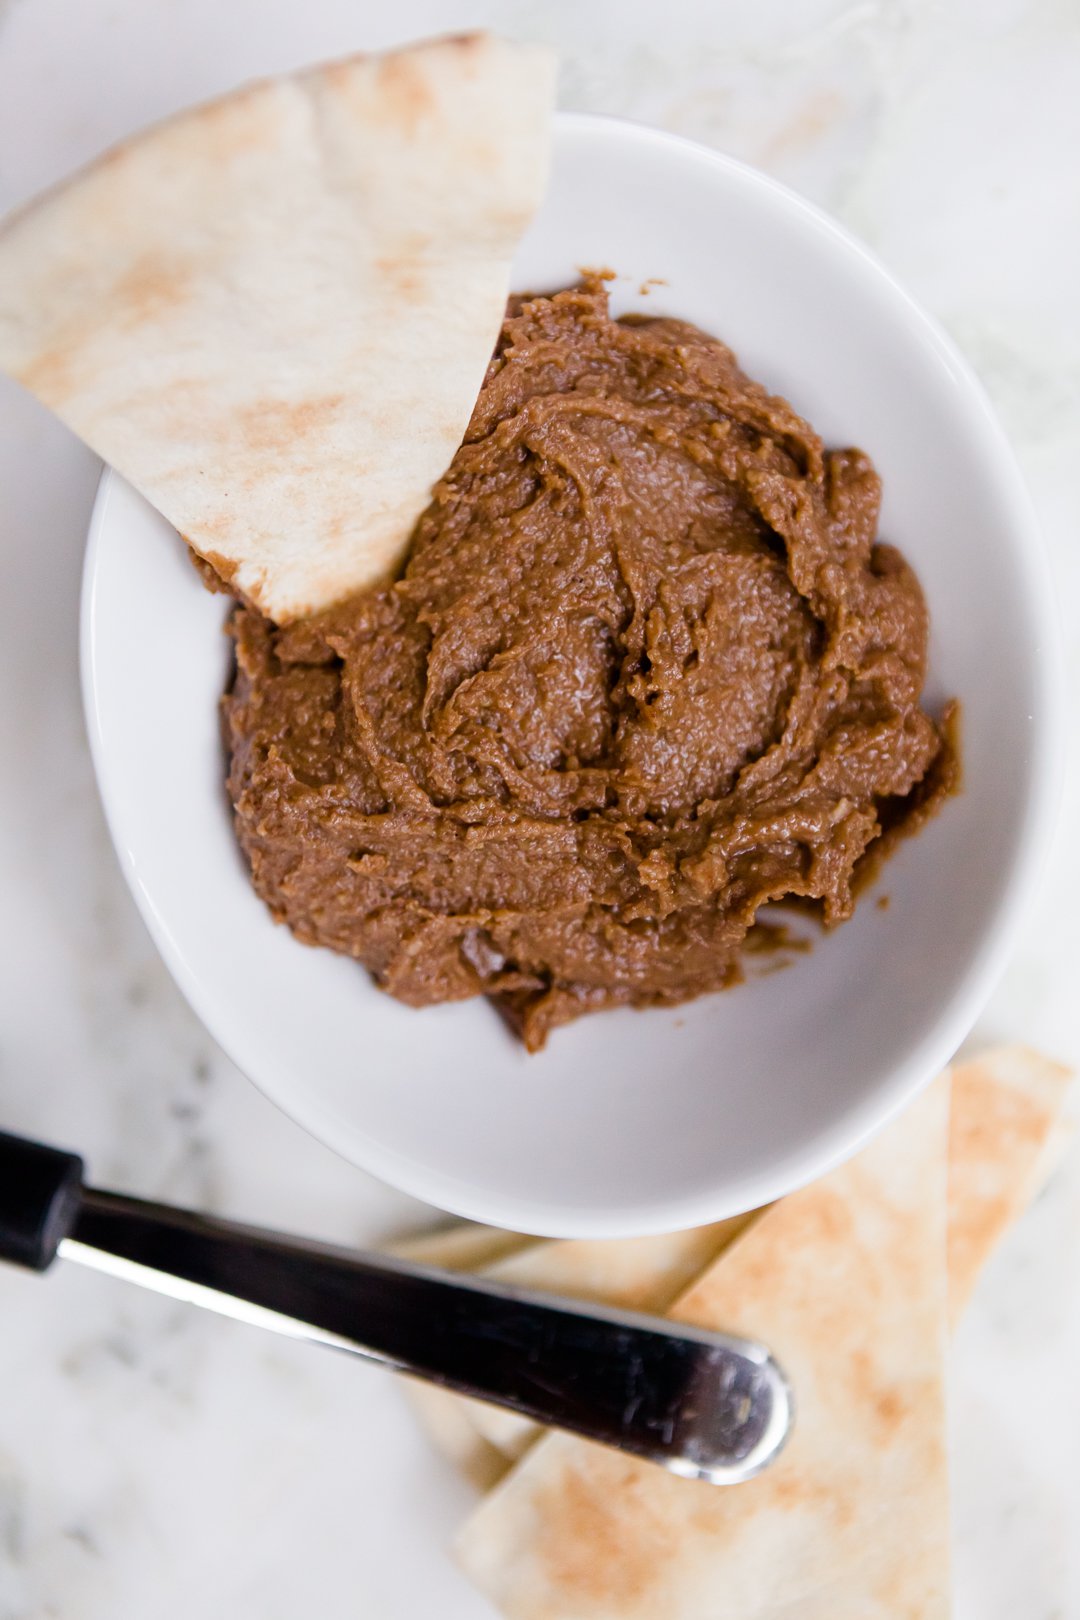 Chocolate hummus in a bowl surrounded by fresh pita bread